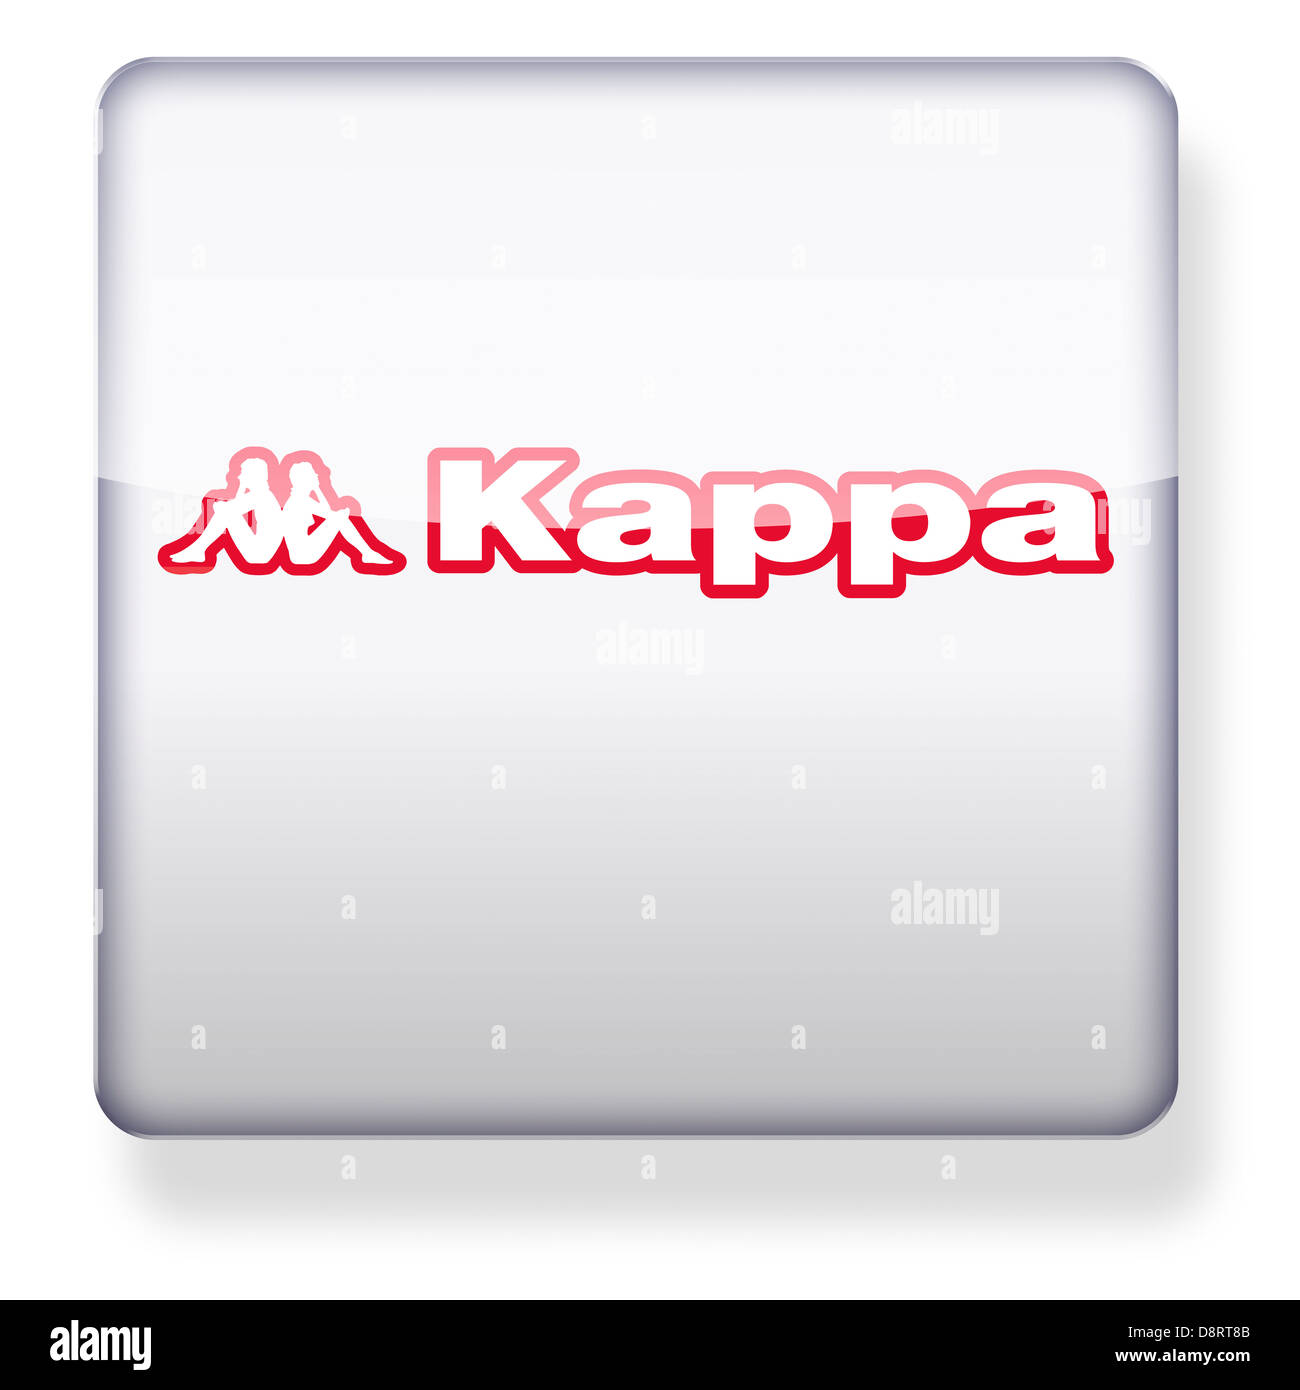 Kappa logo as an app icon. Clipping path included Stock Photo - Alamy